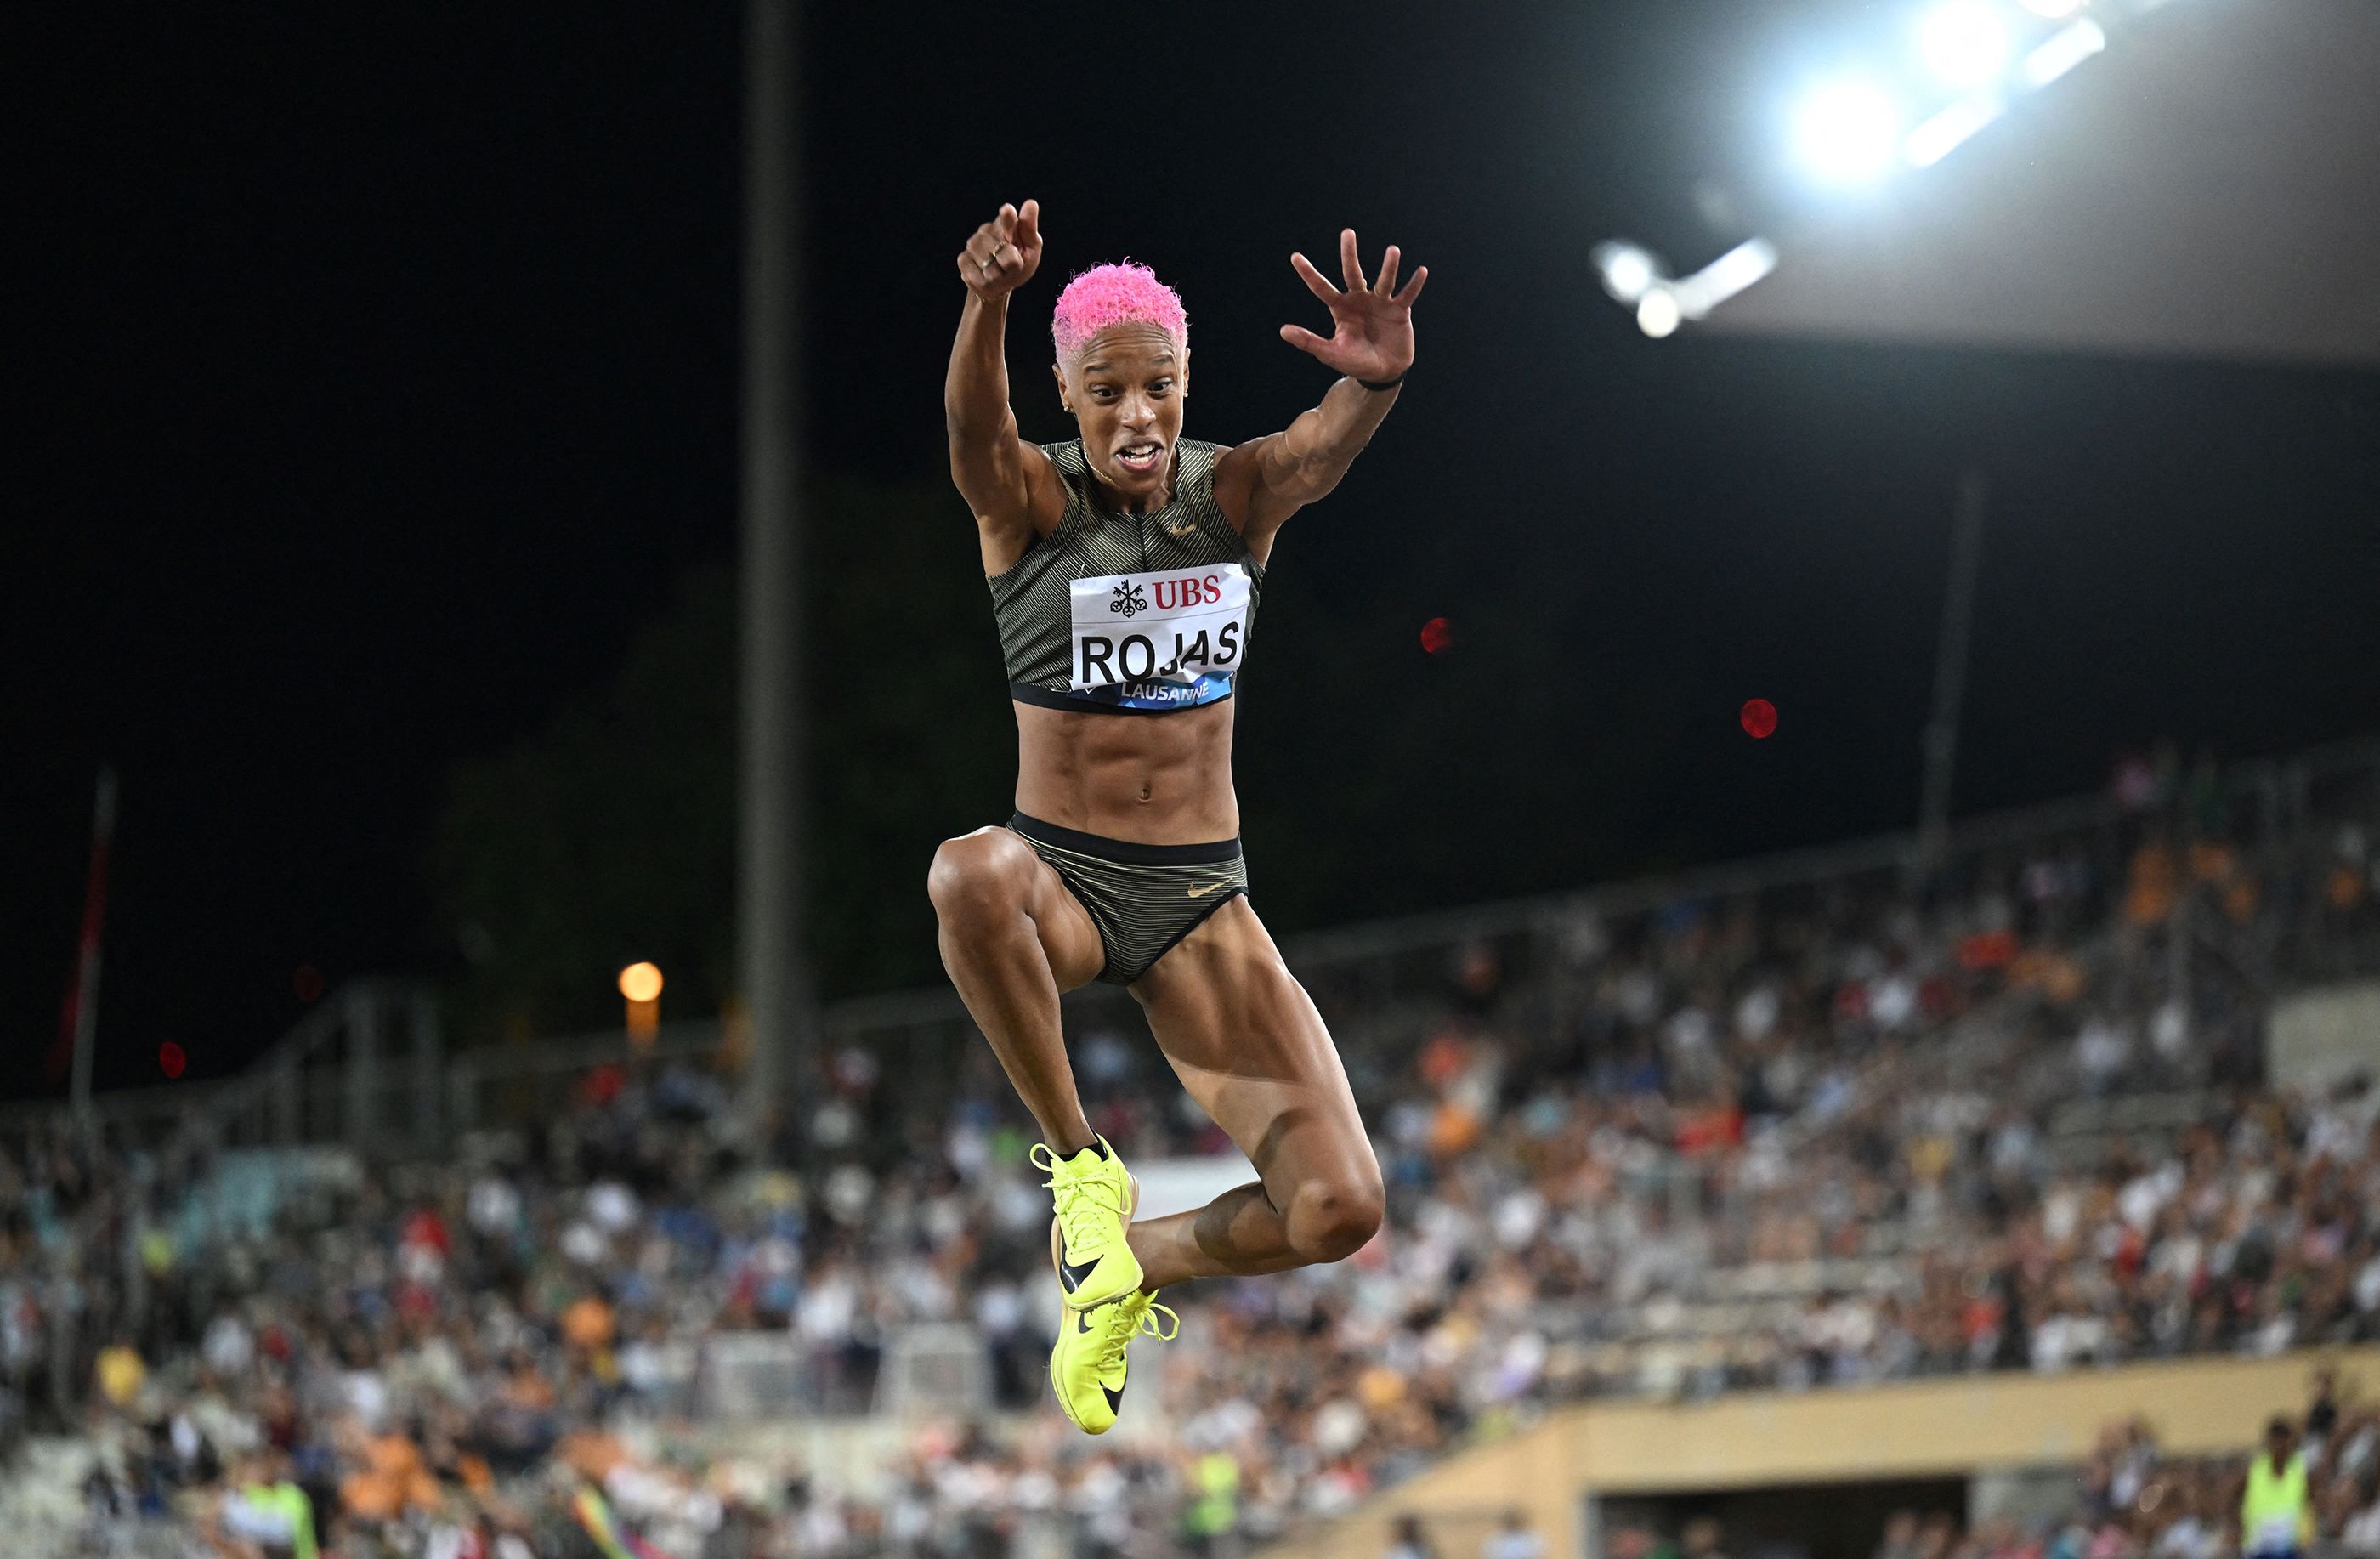 Yulimar Rojas soars to another triple jump victory at the Wanda Diamond League meeting in Lausanne